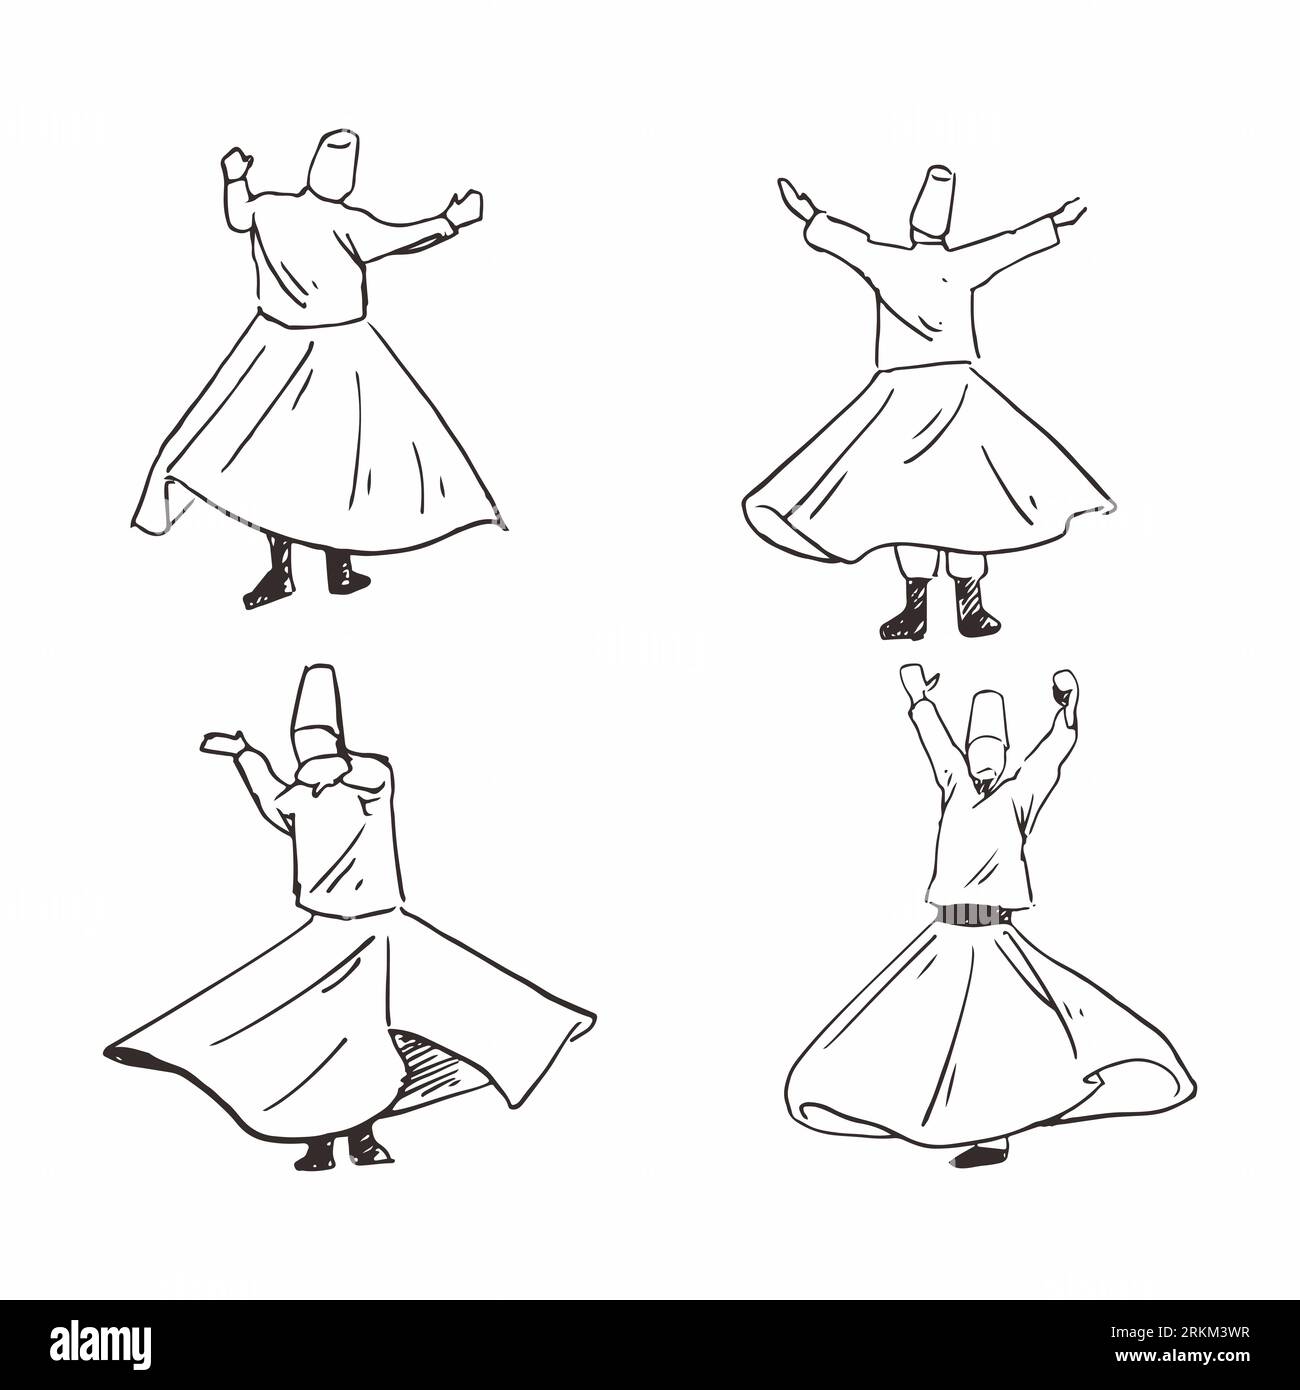 Hand drawn of Whirling dervish sufi dance isolated on white background. Stock Vector